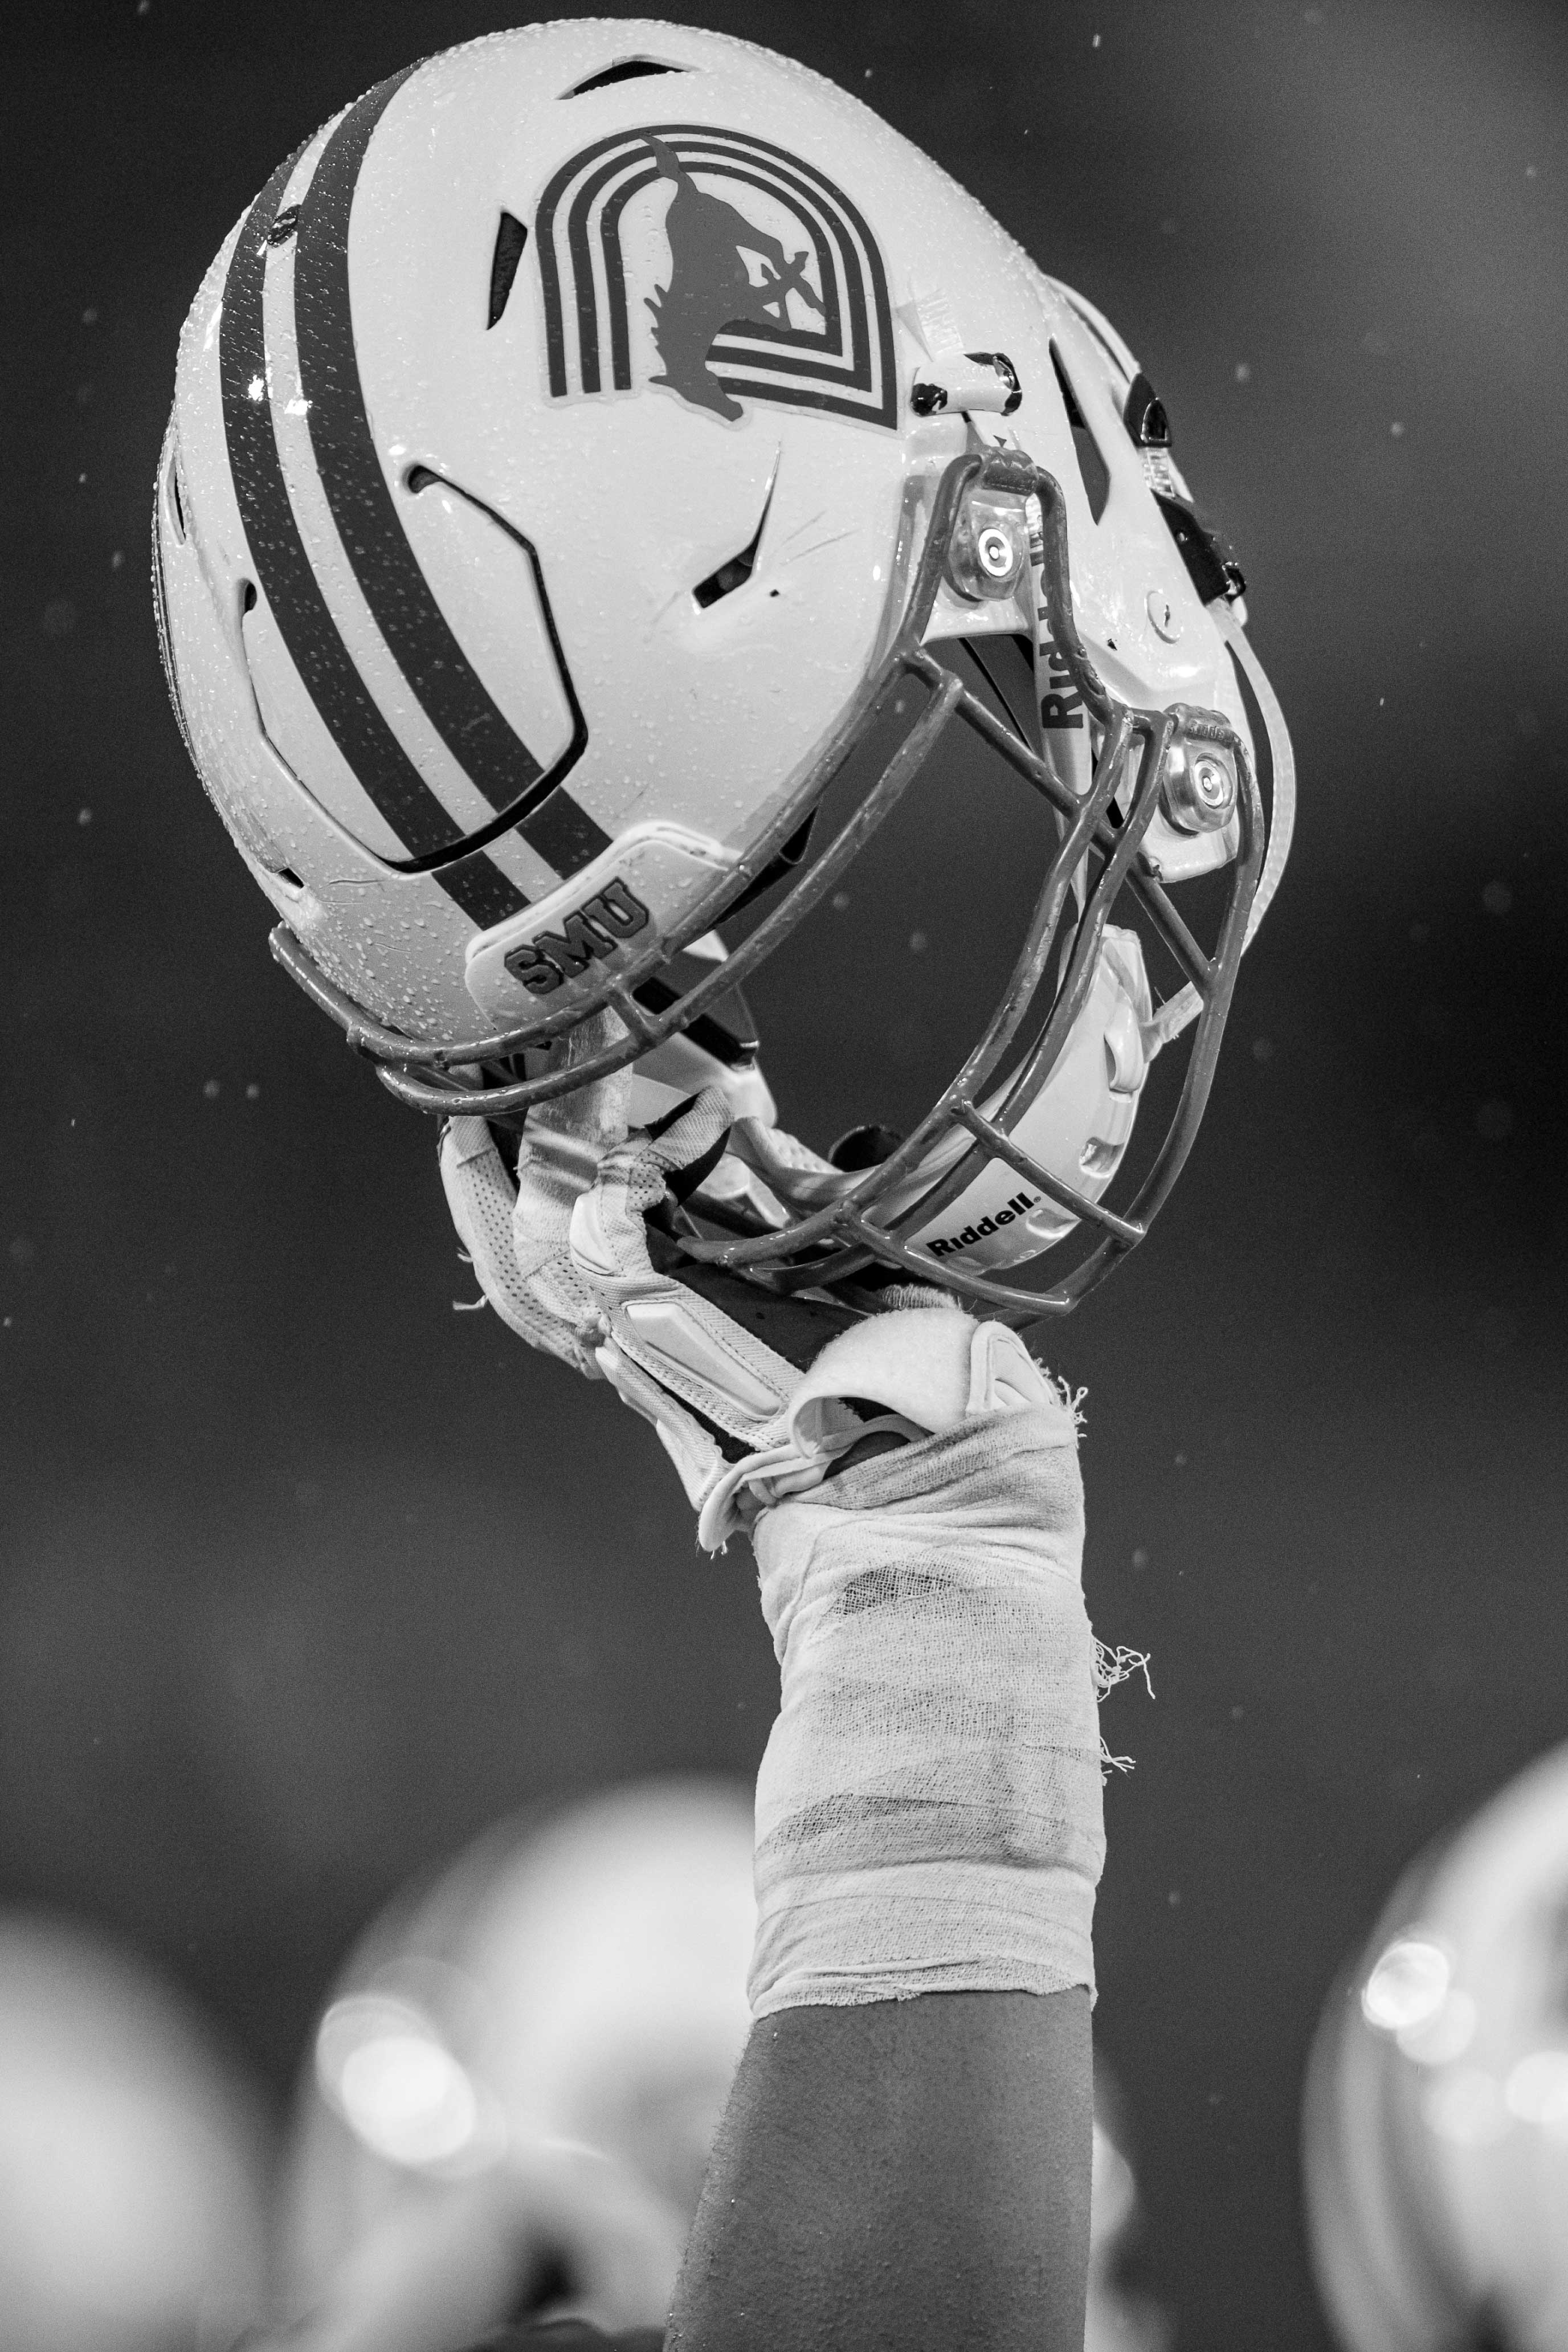 Image of football player's hand holding up a SMU Mustangs helmet